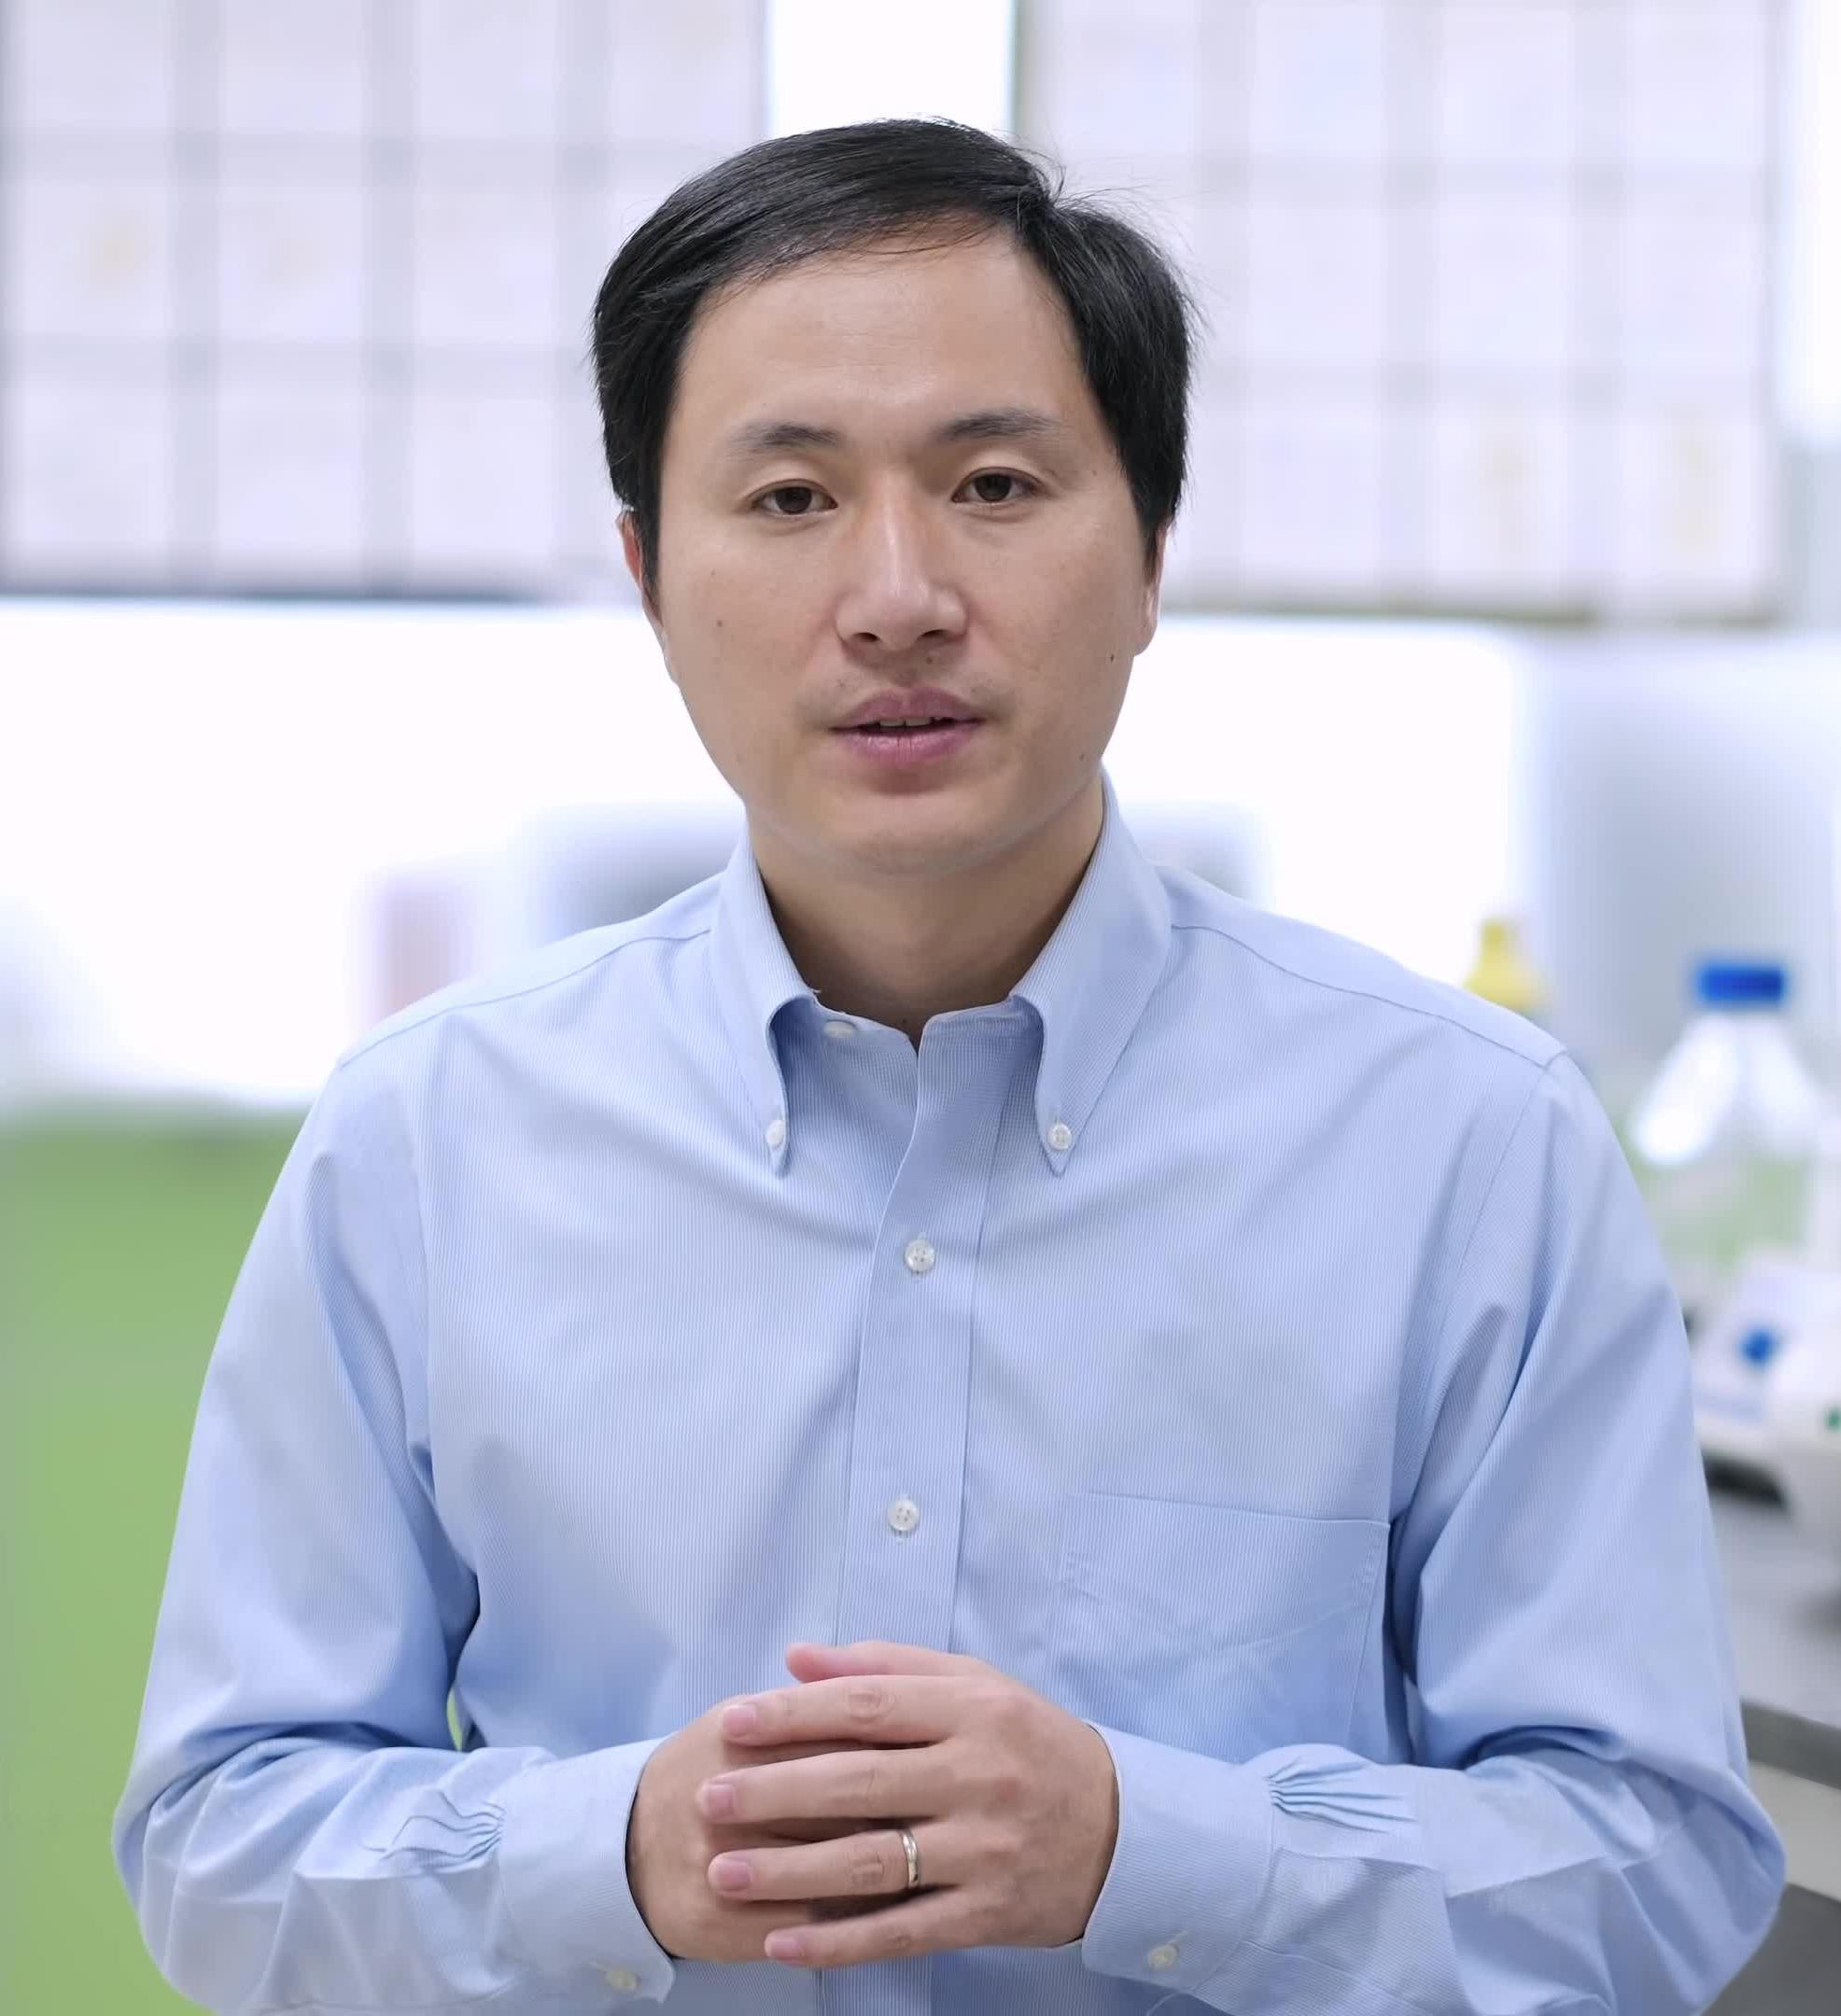 he jiankui in a light blue button up standing in front of a lab. The background is blurred